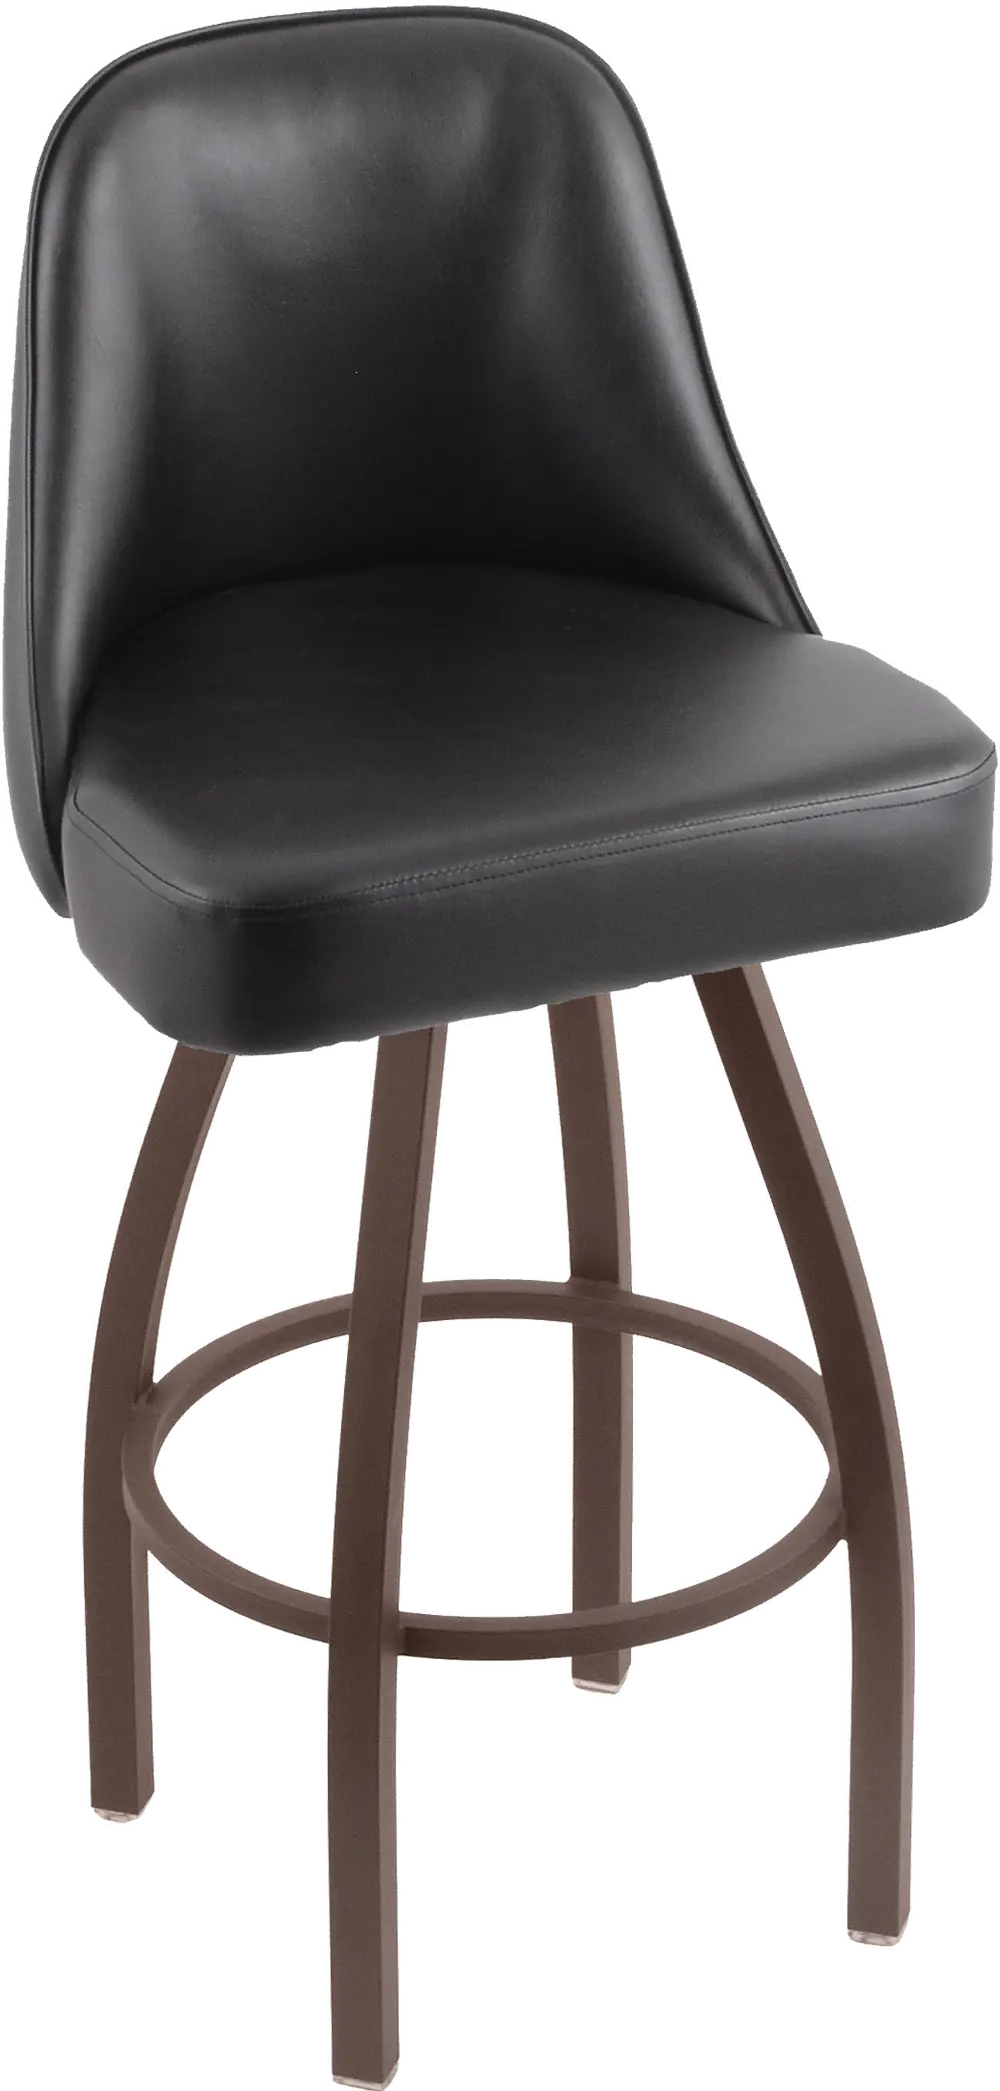 Grizzly Bronze Metal Upholstered Swivel Bar Stool-1